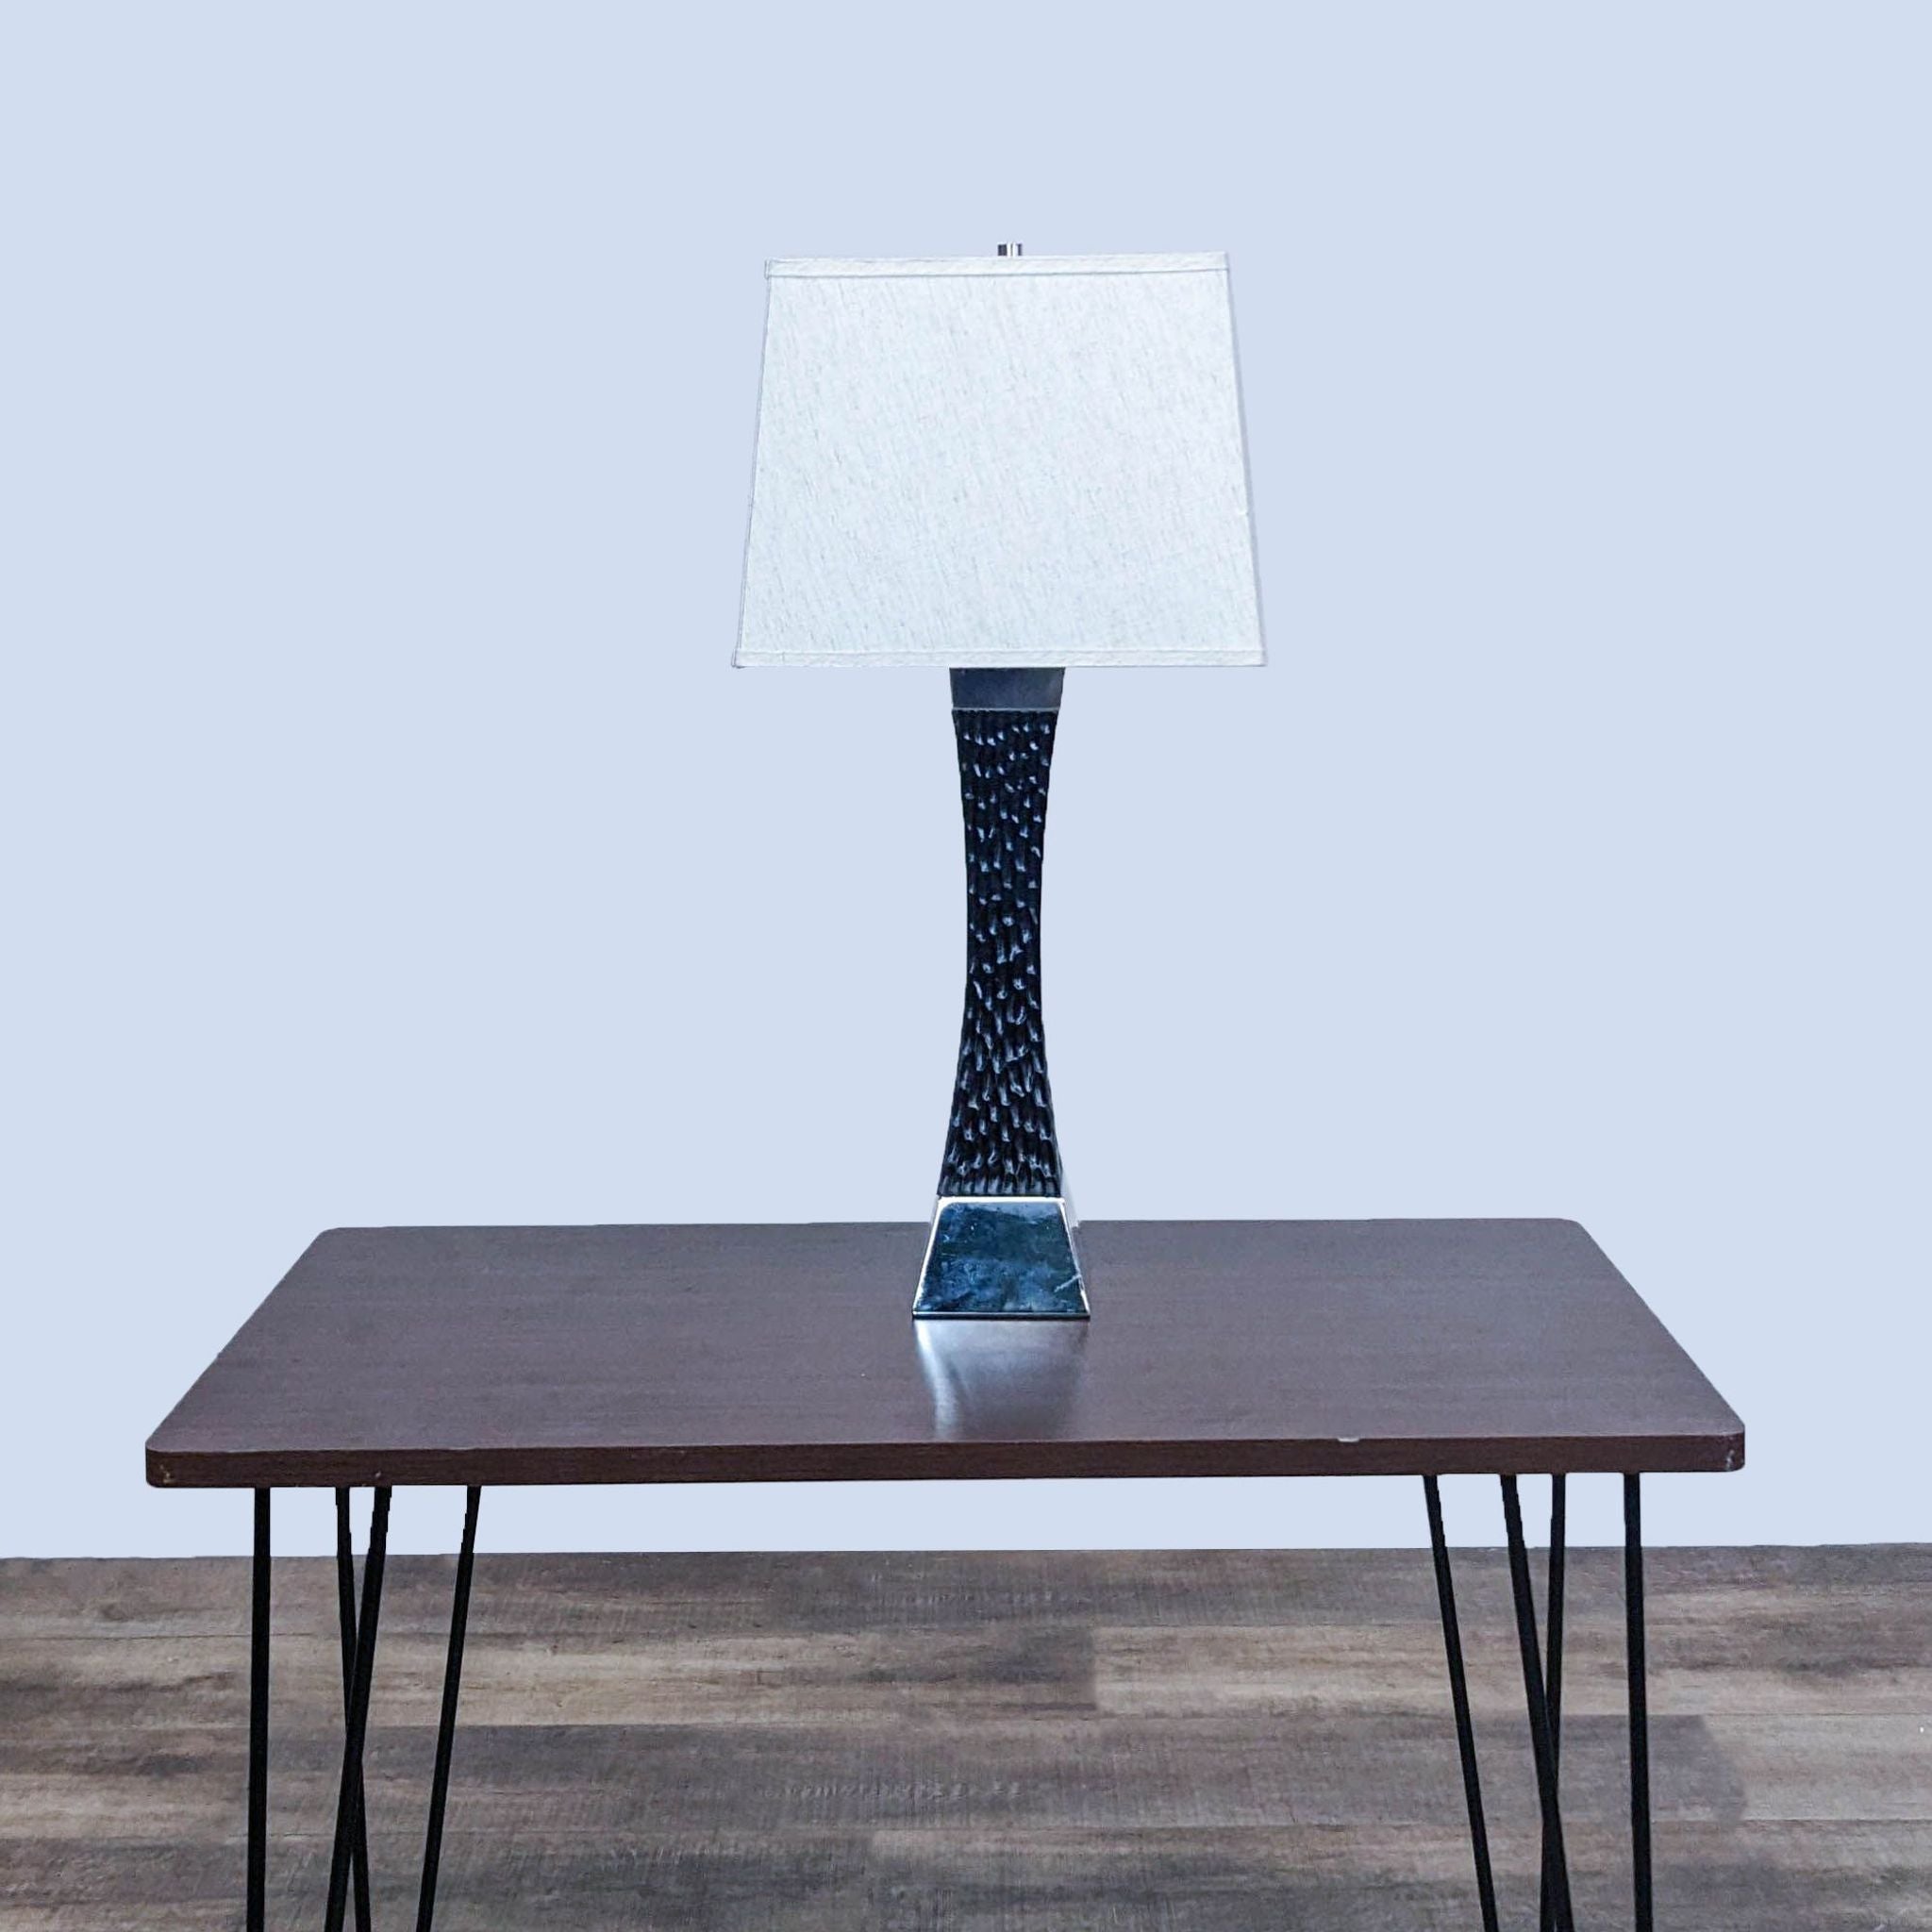 Reperch branded table lamp with a textured base and square white shade on a wooden table against a gray backdrop.